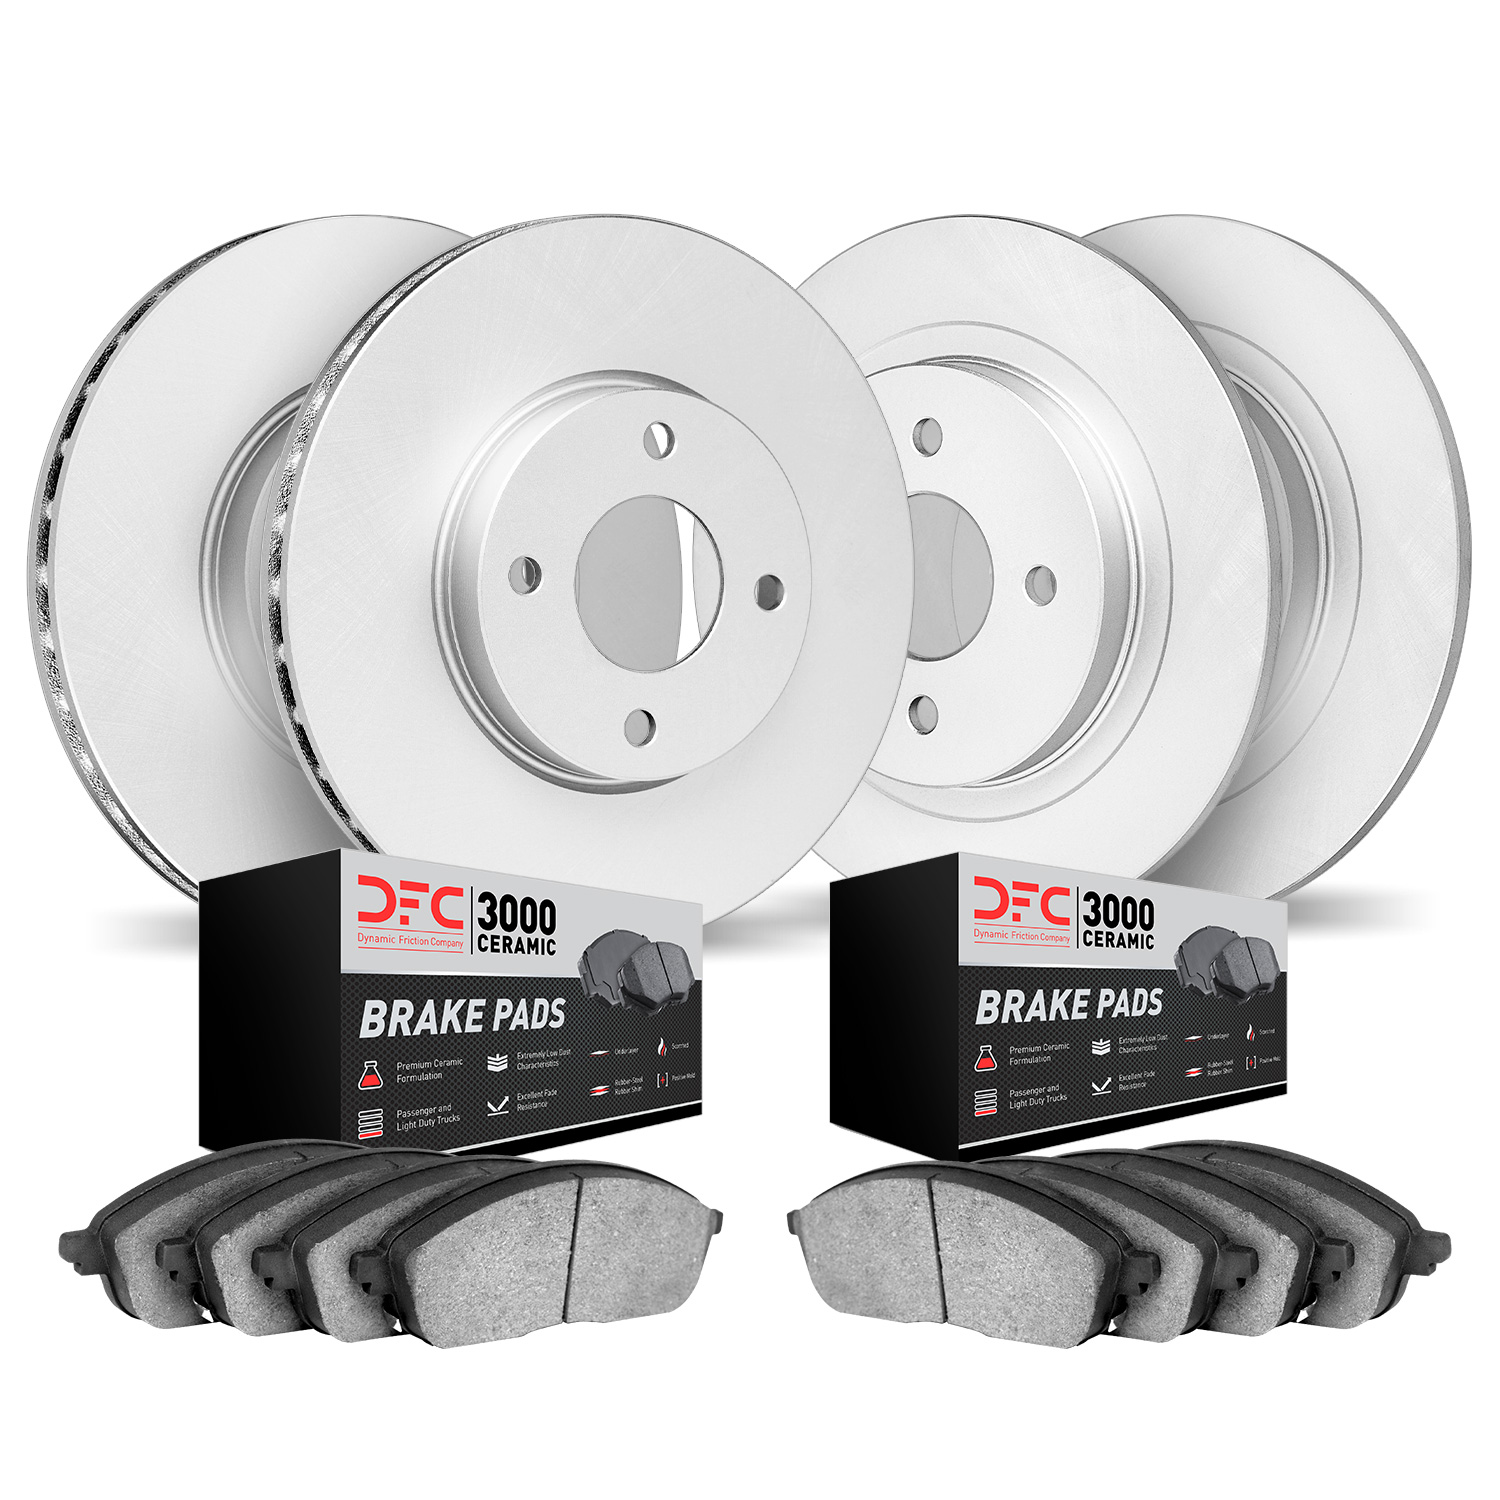 4304-59053 Geospec Brake Rotors with 3000-Series Ceramic Brake Pads Kit, 1999-2000 Acura/Honda, Position: Front and Rear